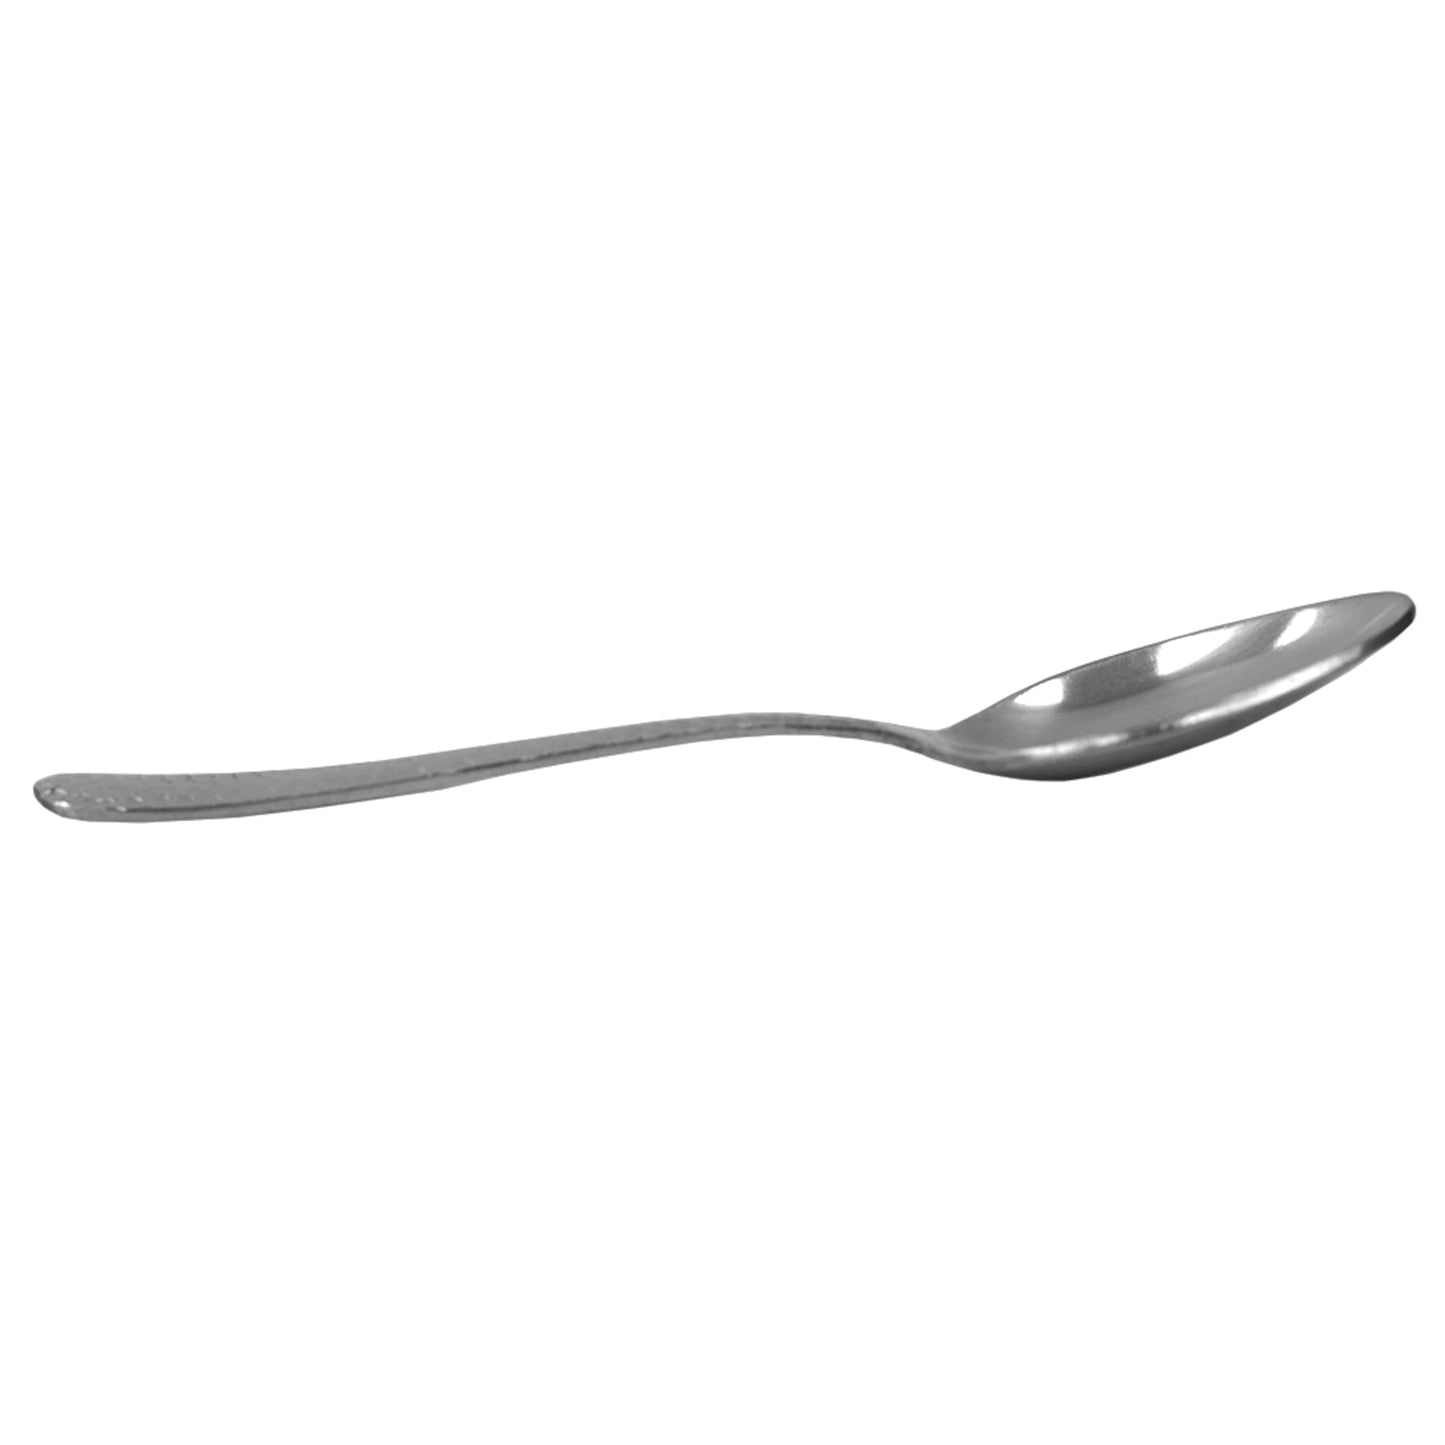 Hammered Stainless Steel Tea Spoons, (Pack of 4), Silver